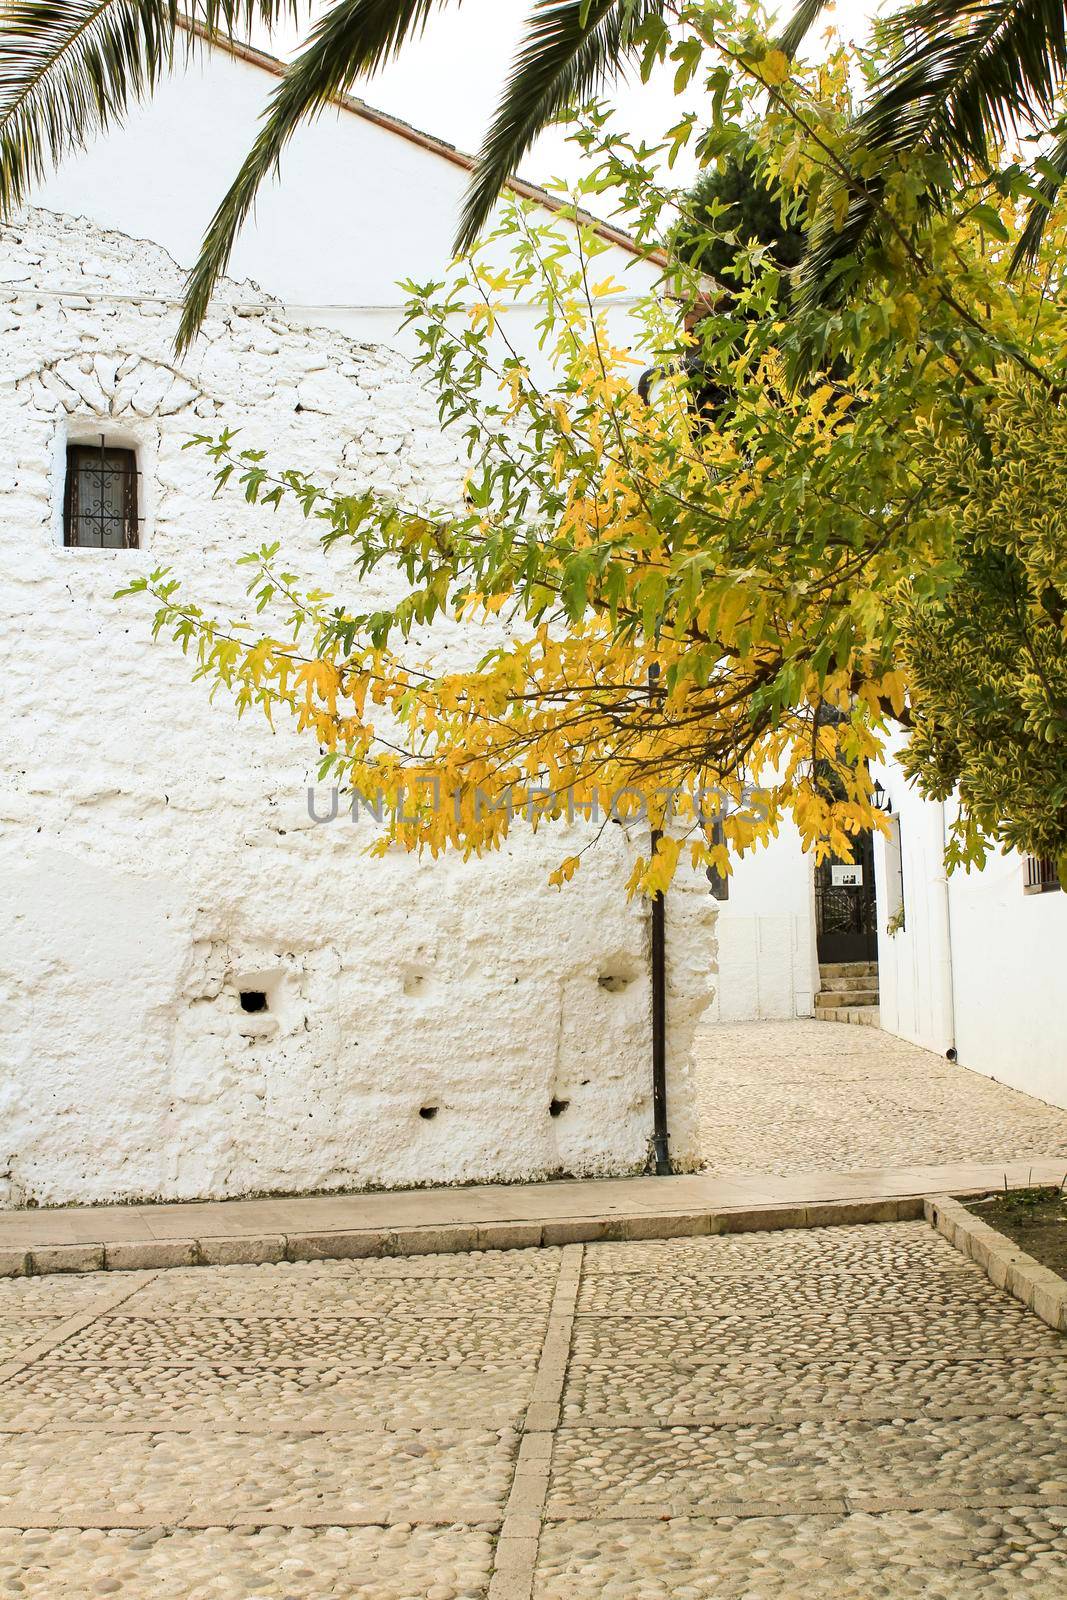 Narrow Street and typical whitewashed facades of the town of Guadalest in Alicante, Spain